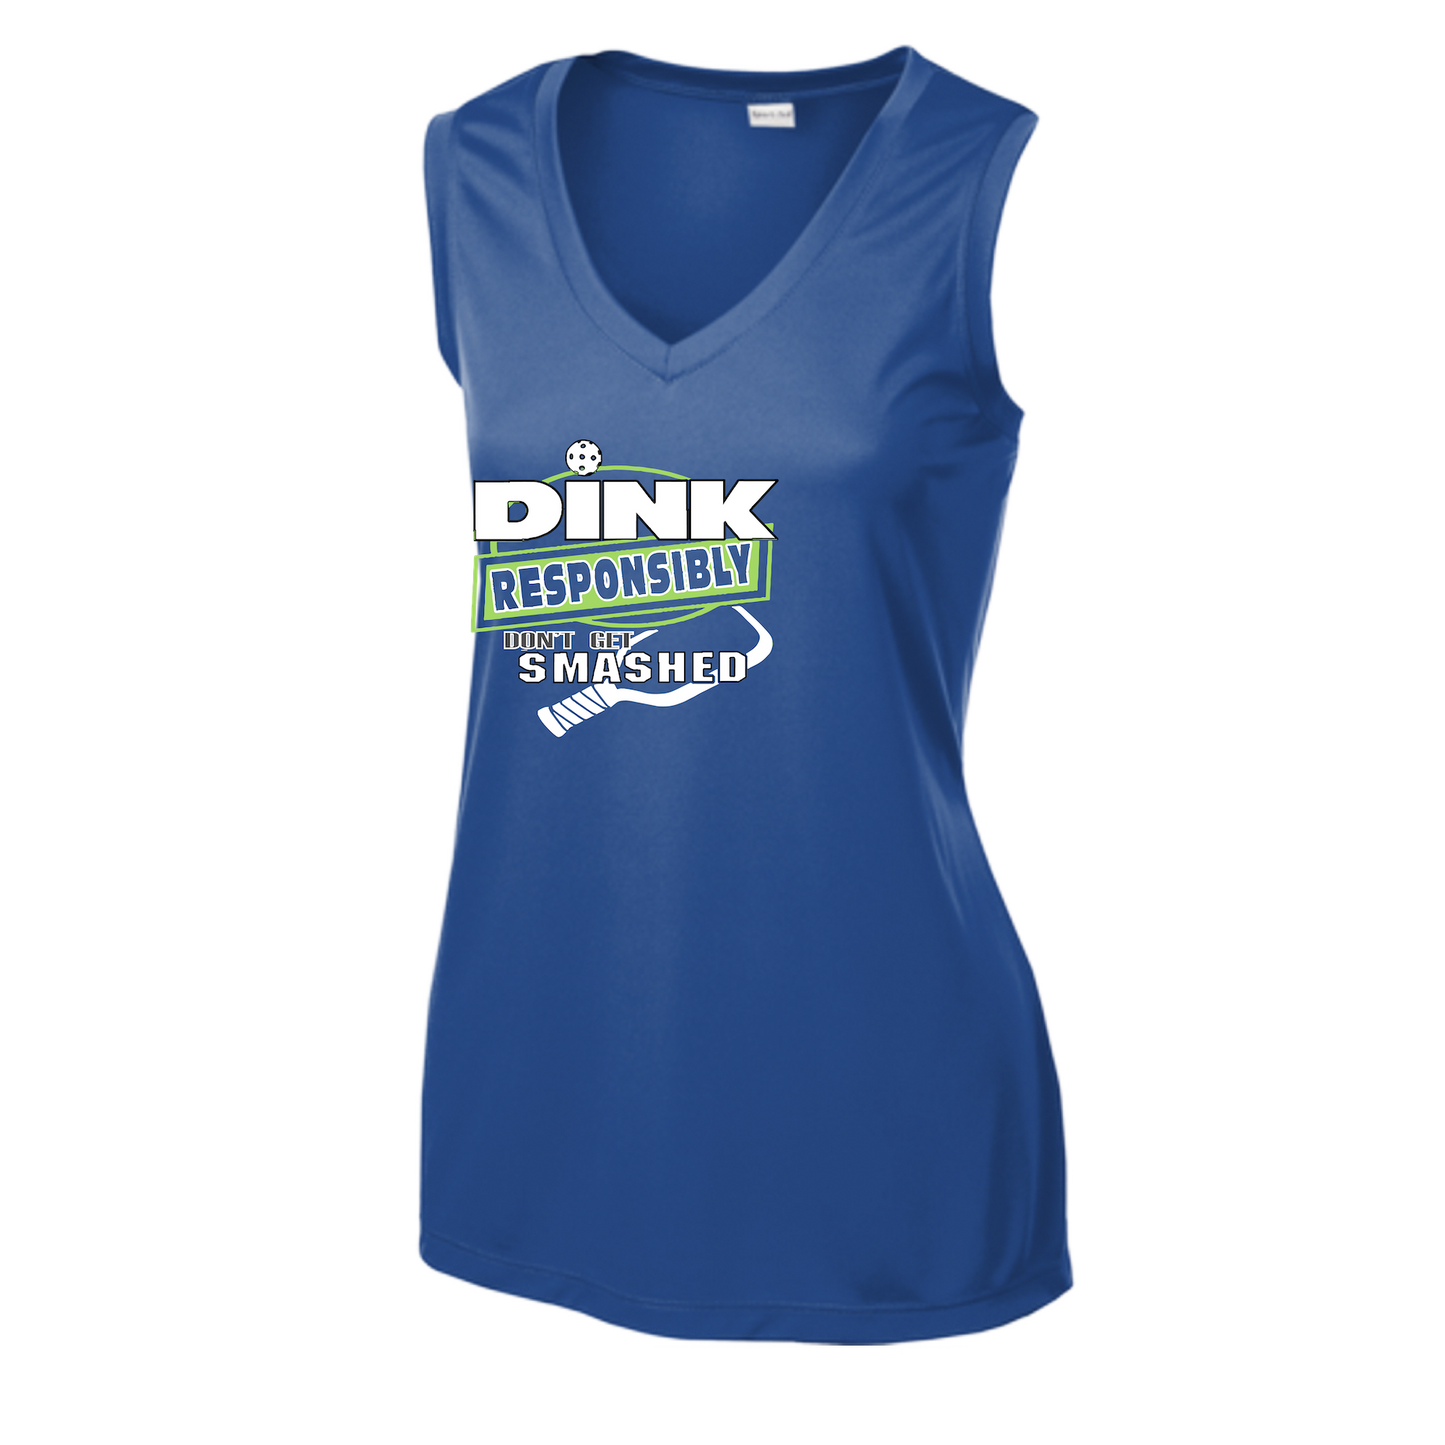 Pickleball Design: Dink Responsibly - Don't Get Smashed  Women's Style: Sleeveless Tank  Shirts are lightweight, roomy and highly breathable. These moisture-wicking shirts are designed for athletic performance. They feature PosiCharge technology to lock in color and prevent logos from fading. Removable tag and set-in sleeves for comfort.